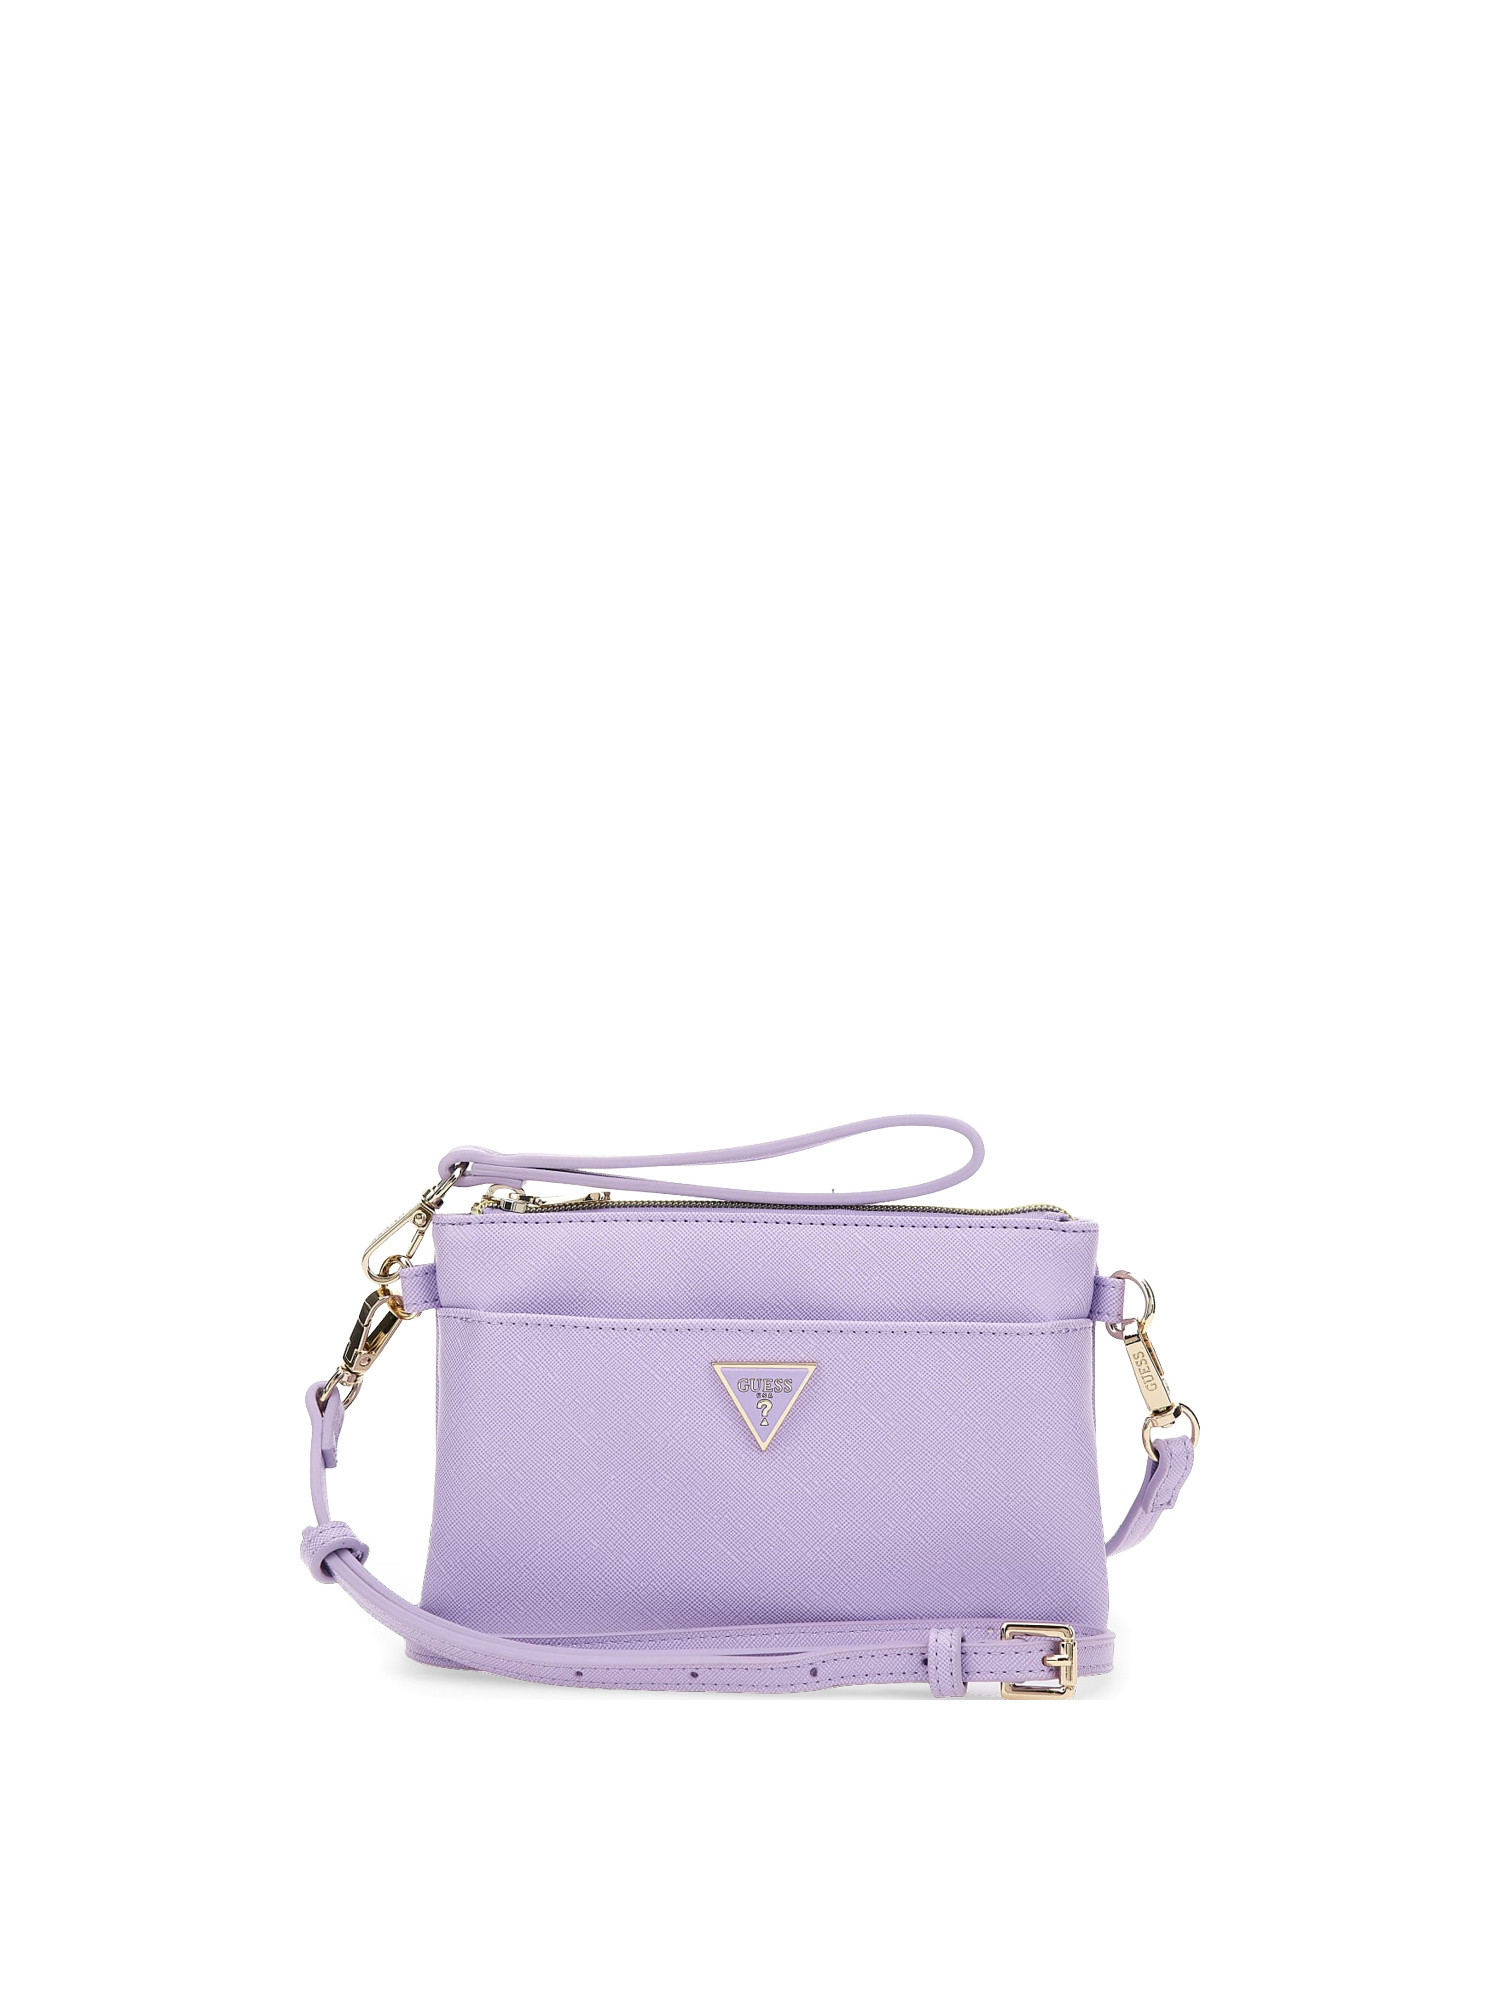 Guess - Pouch con logo, Viola lilla, large image number 0